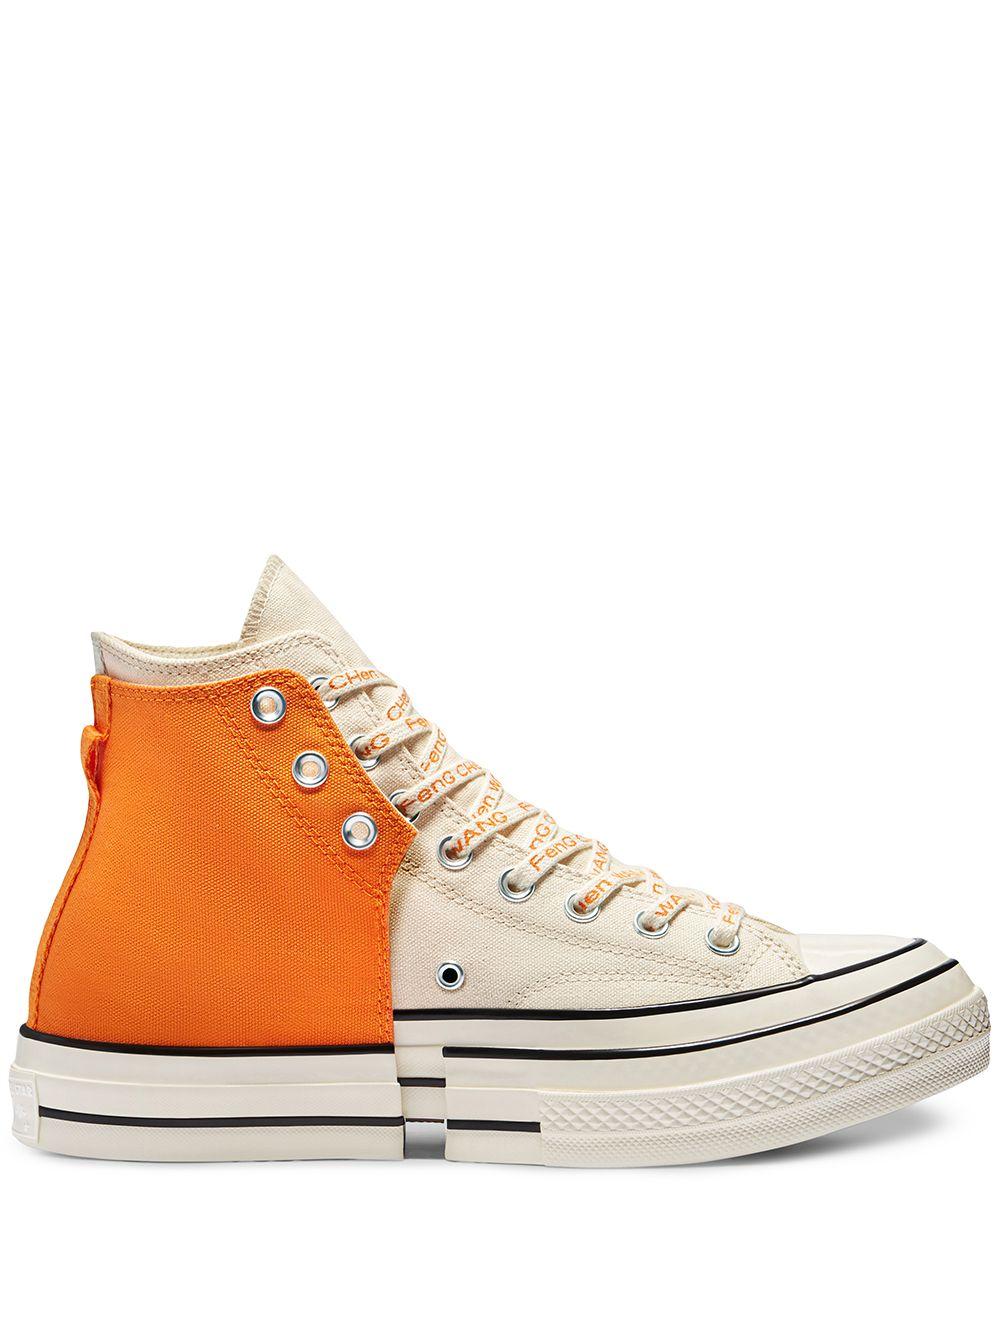 Converse Canvas X Feng Chen Wang 2in1 Chucks in White for Men - Lyst